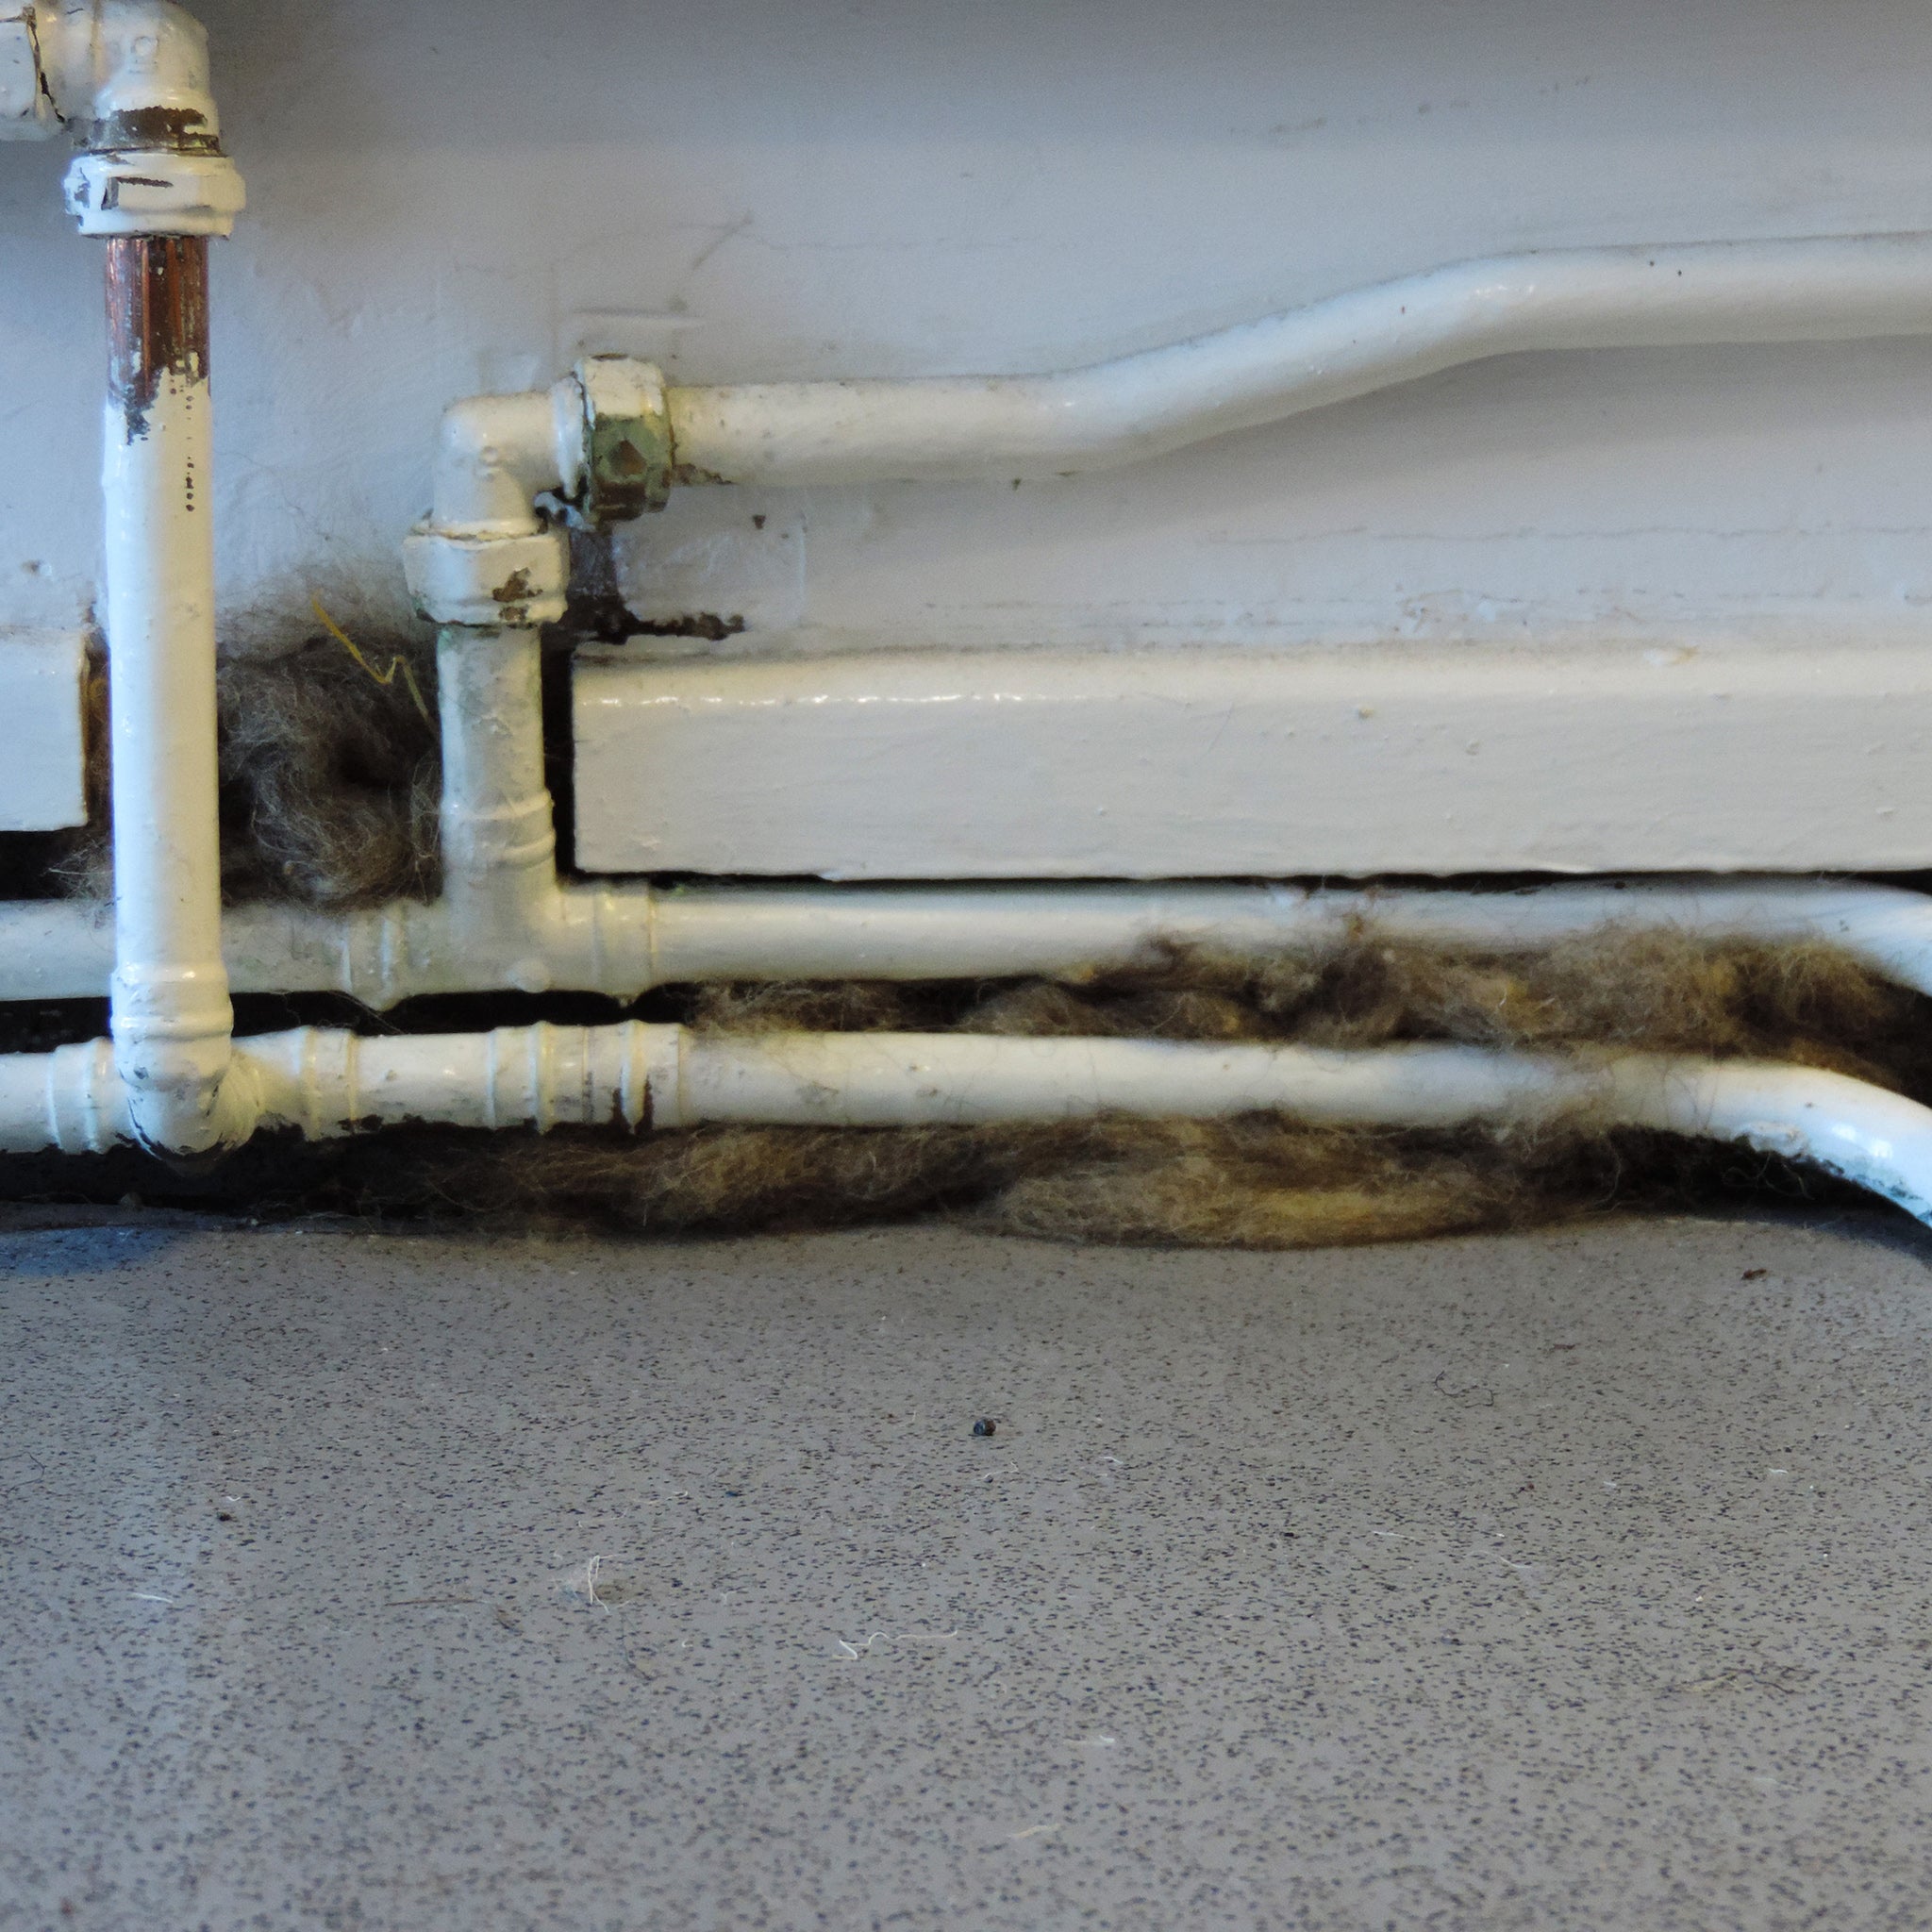 sheep wool insulation around pipe work in the home